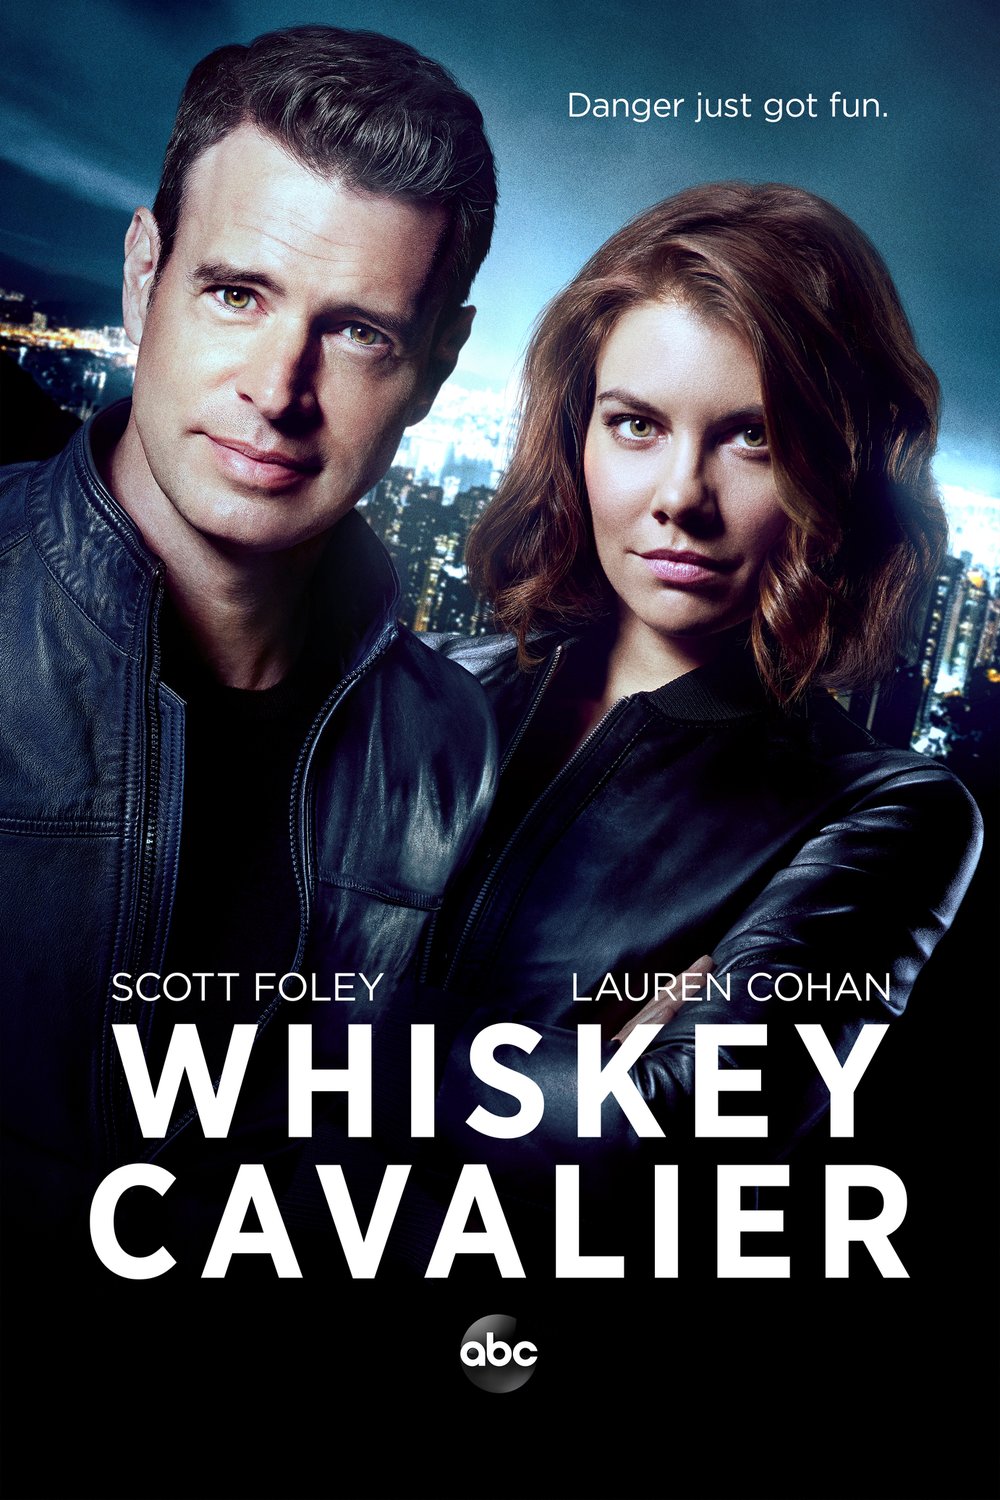 Poster of the movie Whiskey Cavalier